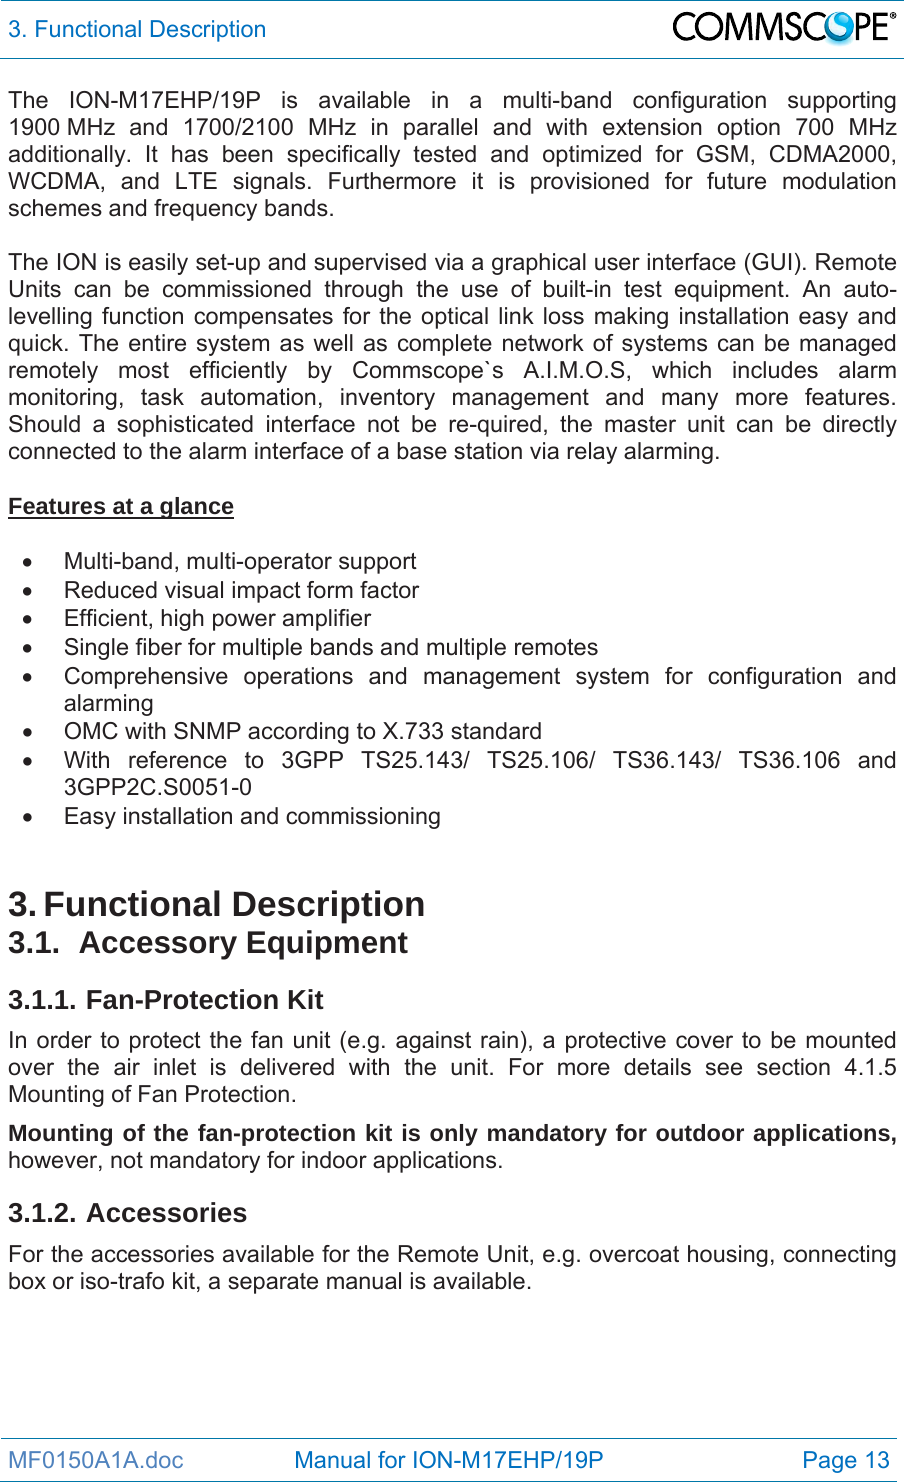 3. Functional Description  MF0150A1A.doc                 Manual for ION-M17EHP/19P  Page 13 The ION-M17EHP/19P is available in a multi-band configuration supporting 1900 MHz and 1700/2100 MHz in parallel and with extension option 700 MHz additionally. It has been specifically tested and optimized for GSM, CDMA2000, WCDMA, and LTE signals. Furthermore it is provisioned for future modulation schemes and frequency bands.  The ION is easily set-up and supervised via a graphical user interface (GUI). Remote Units can be commissioned through the use of built-in test equipment. An auto-levelling function compensates for the optical link loss making installation easy and quick. The entire system as well as complete network of systems can be managed remotely most efficiently by Commscope`s A.I.M.O.S, which includes alarm monitoring, task automation, inventory management and many more features. Should a sophisticated interface not be re-quired, the master unit can be directly connected to the alarm interface of a base station via relay alarming.  Features at a glance   Multi-band, multi-operator support   Reduced visual impact form factor   Efficient, high power amplifier   Single fiber for multiple bands and multiple remotes   Comprehensive operations and management system for configuration and alarming   OMC with SNMP according to X.733 standard   With reference to 3GPP TS25.143/ TS25.106/ TS36.143/ TS36.106 and 3GPP2C.S0051-0  Easy installation and commissioning   3. Functional Description 3.1. Accessory Equipment 3.1.1. Fan-Protection Kit In order to protect the fan unit (e.g. against rain), a protective cover to be mounted over the air inlet is delivered with the unit. For more details see section 4.1.5 Mounting of Fan Protection.  Mounting of the fan-protection kit is only mandatory for outdoor applications, however, not mandatory for indoor applications. 3.1.2. Accessories For the accessories available for the Remote Unit, e.g. overcoat housing, connecting box or iso-trafo kit, a separate manual is available. 